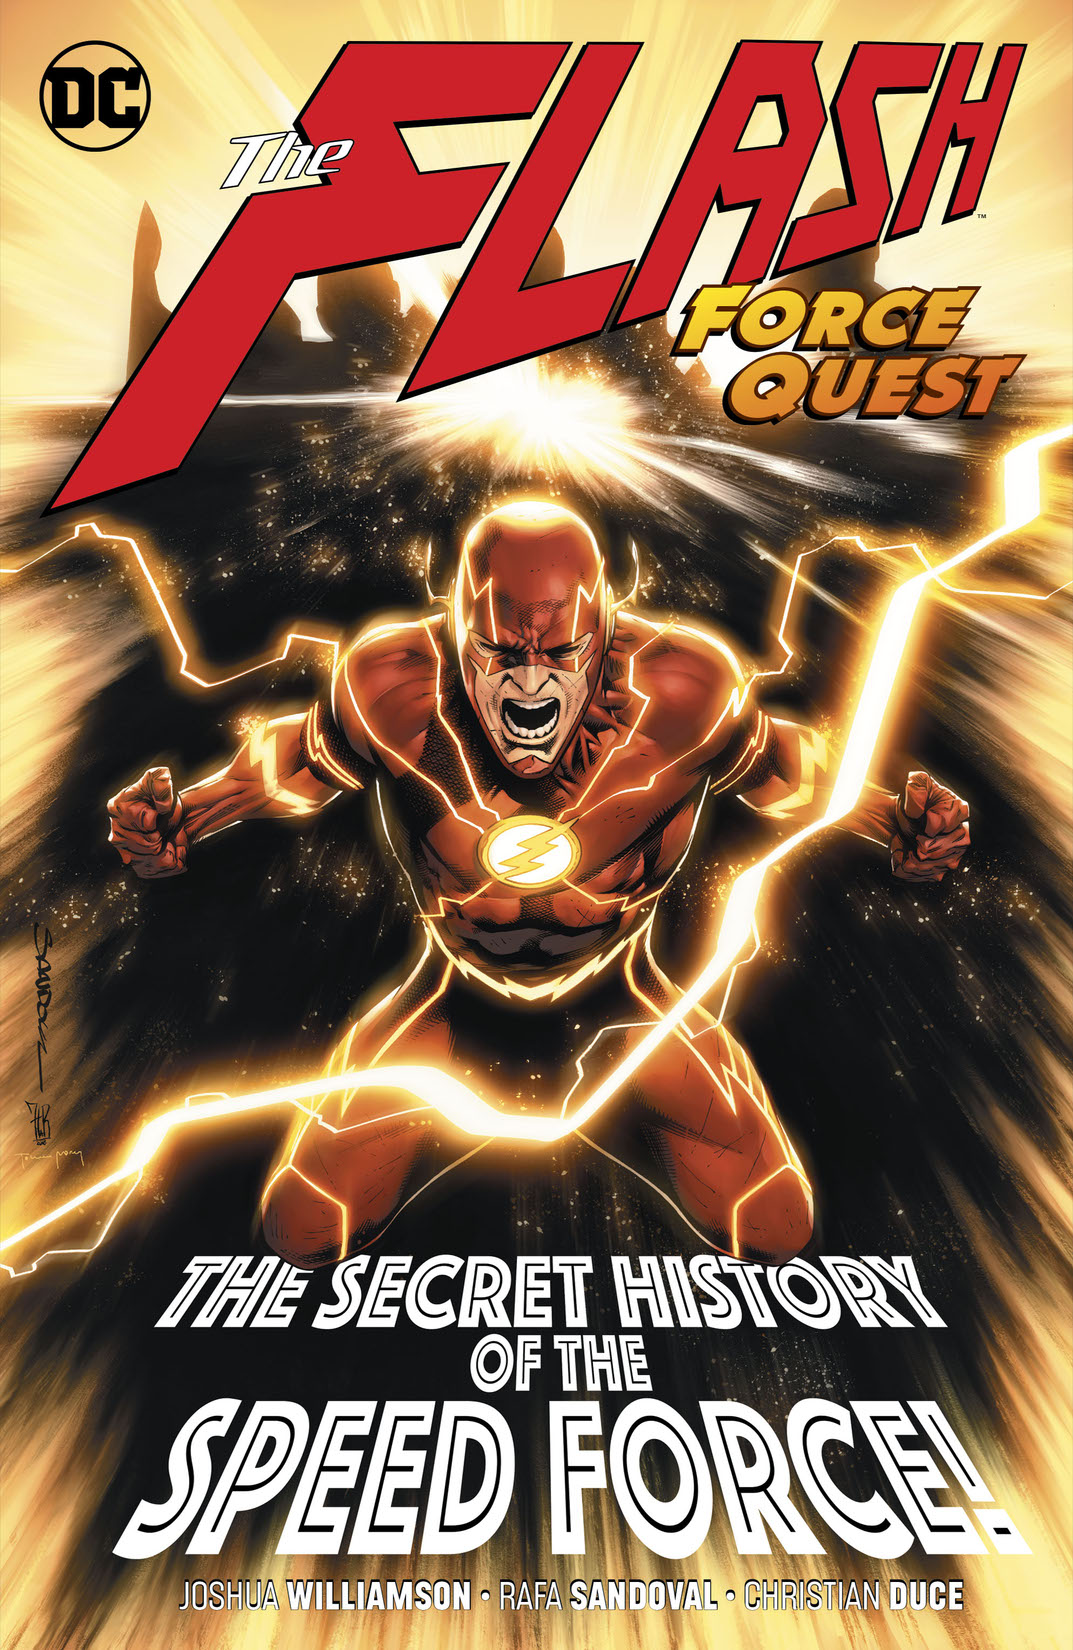 The Flash Vol. 10: Force Quest preview images